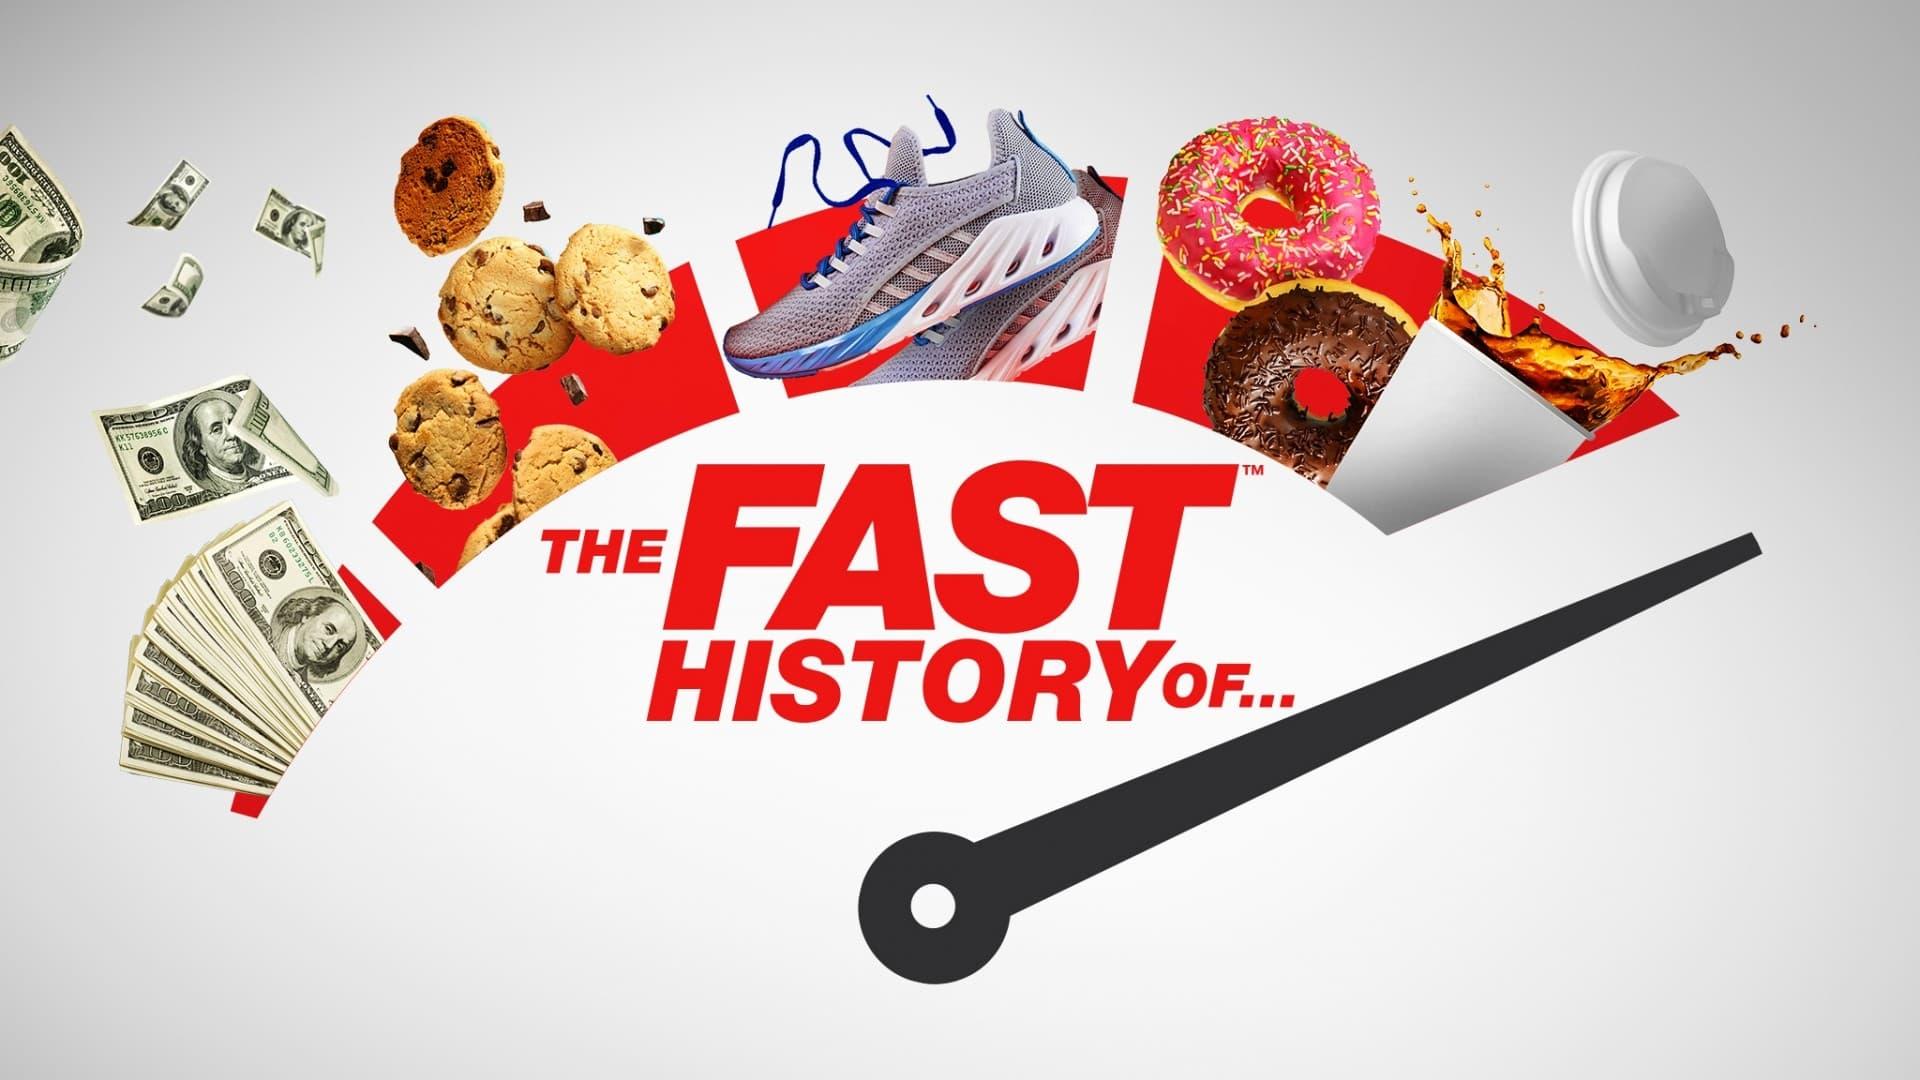 The Fast History Of... backdrop